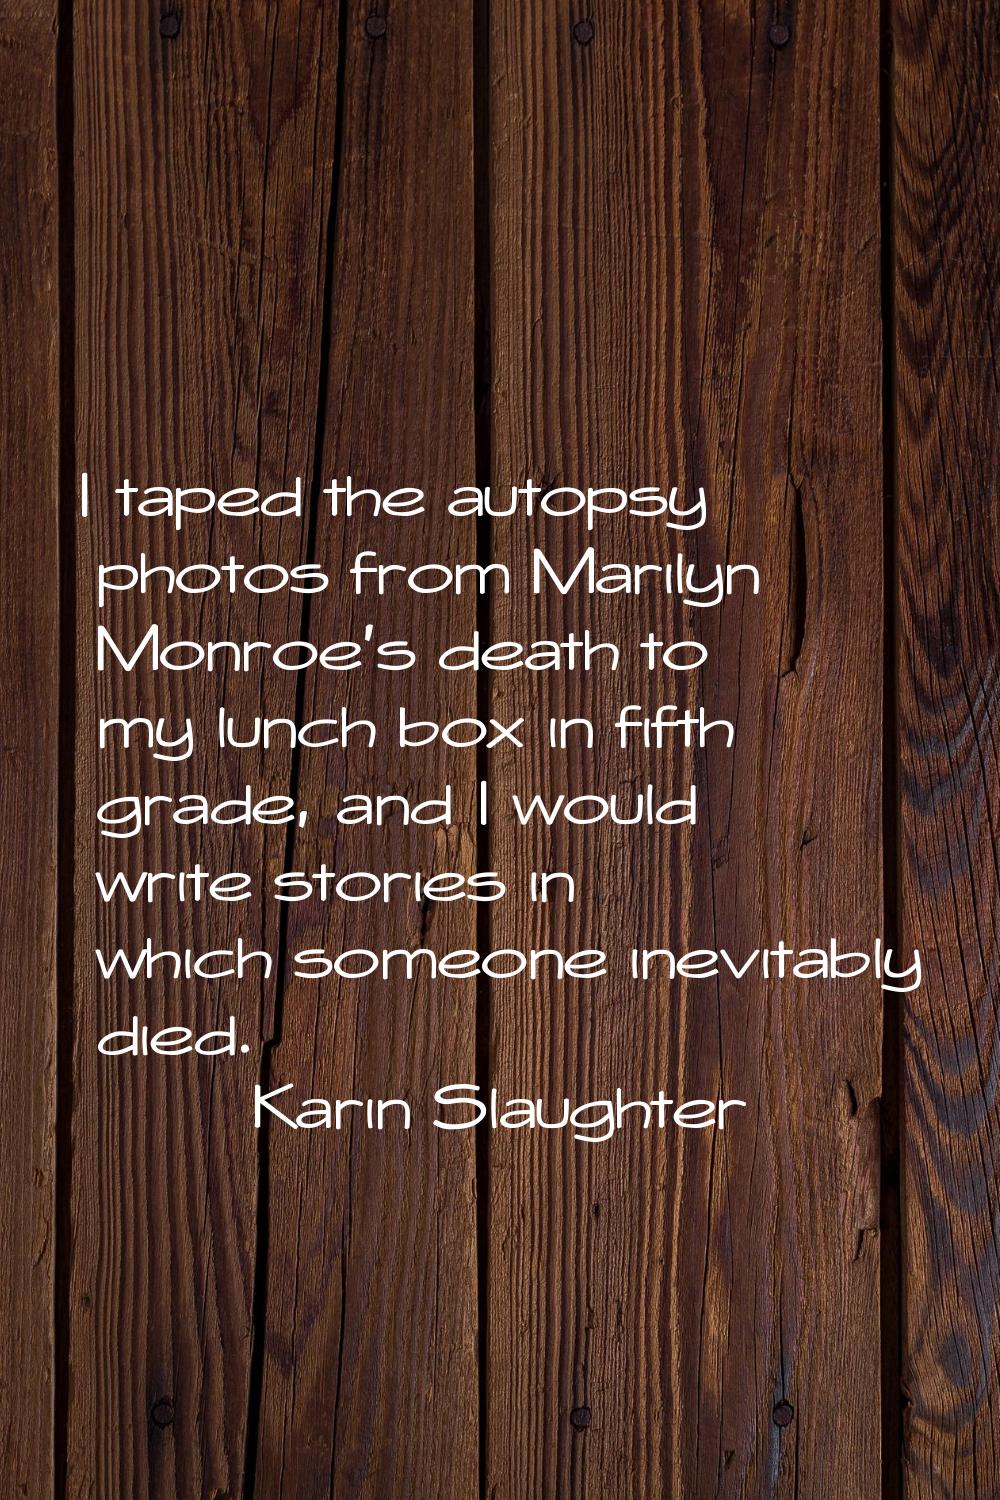 I taped the autopsy photos from Marilyn Monroe's death to my lunch box in fifth grade, and I would 